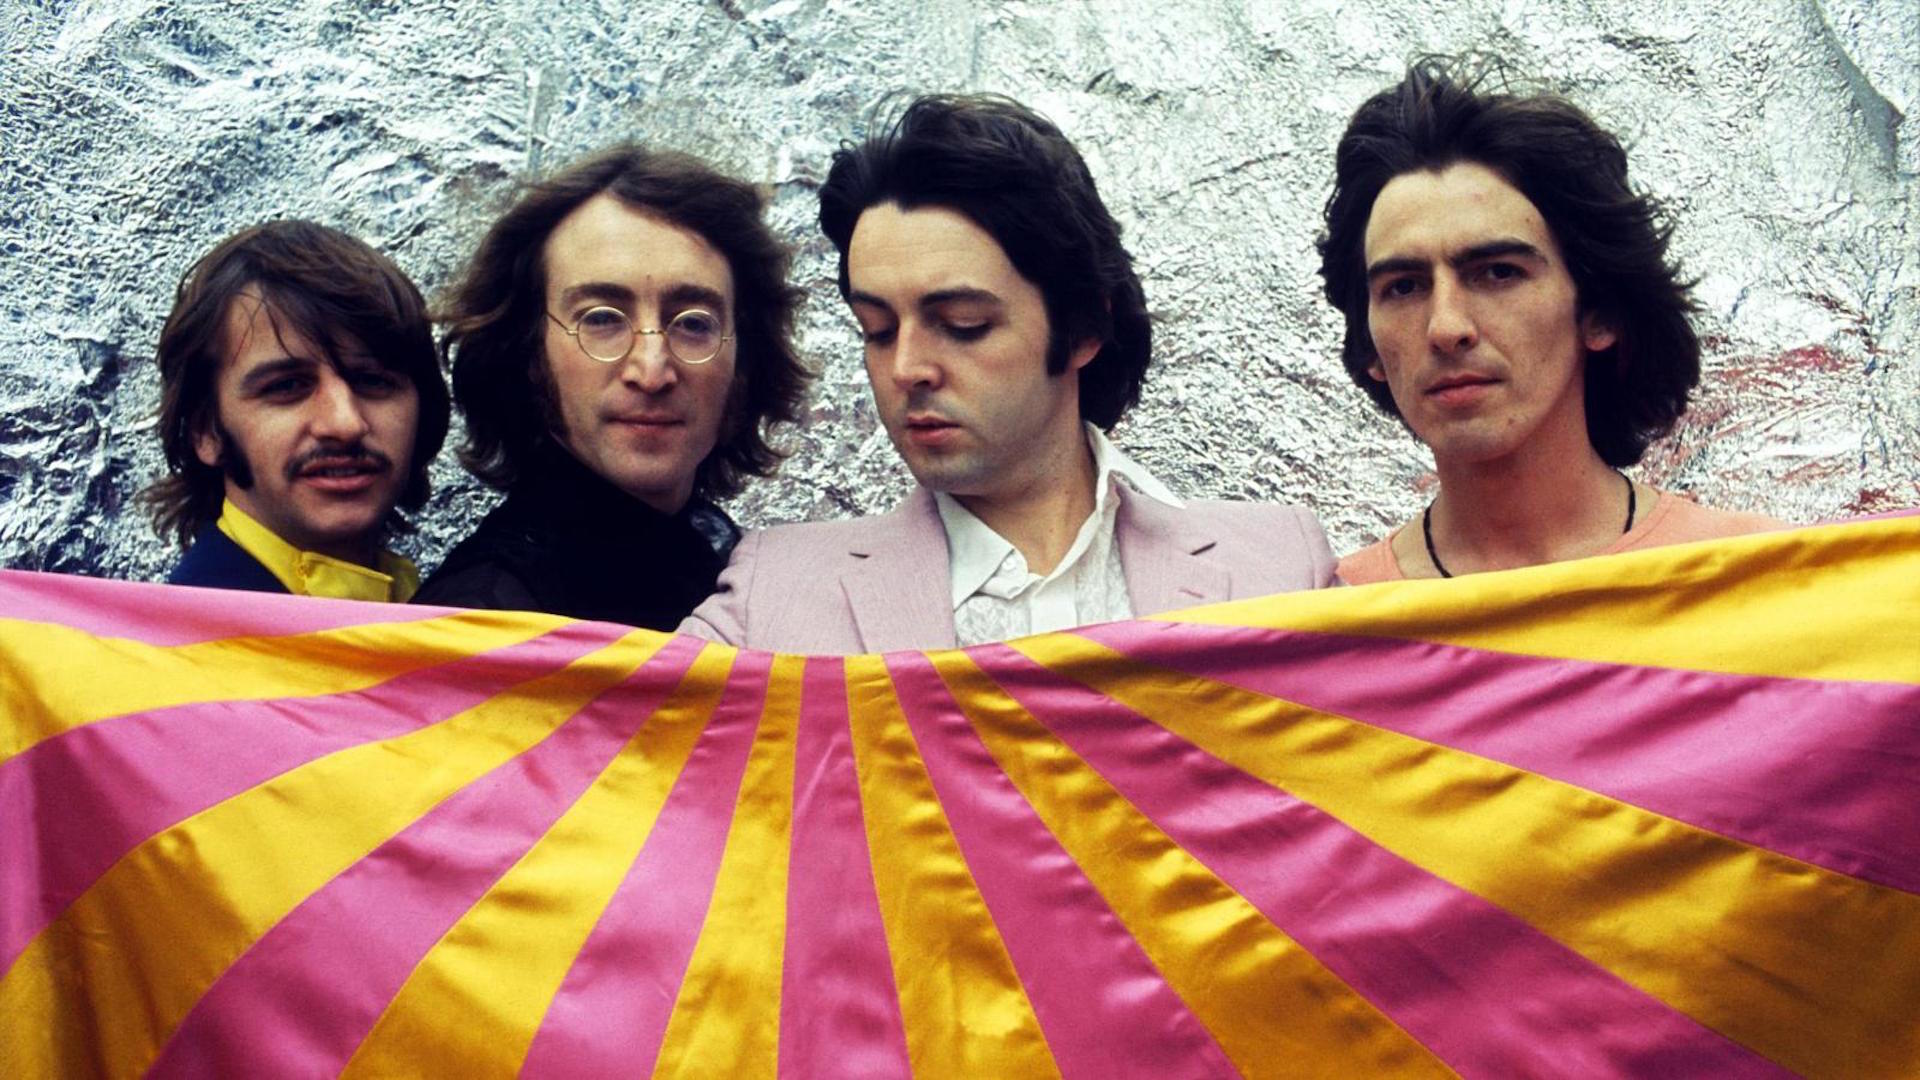 The Beatles HD Wallpaper | Background Image | 1920x1080 ...